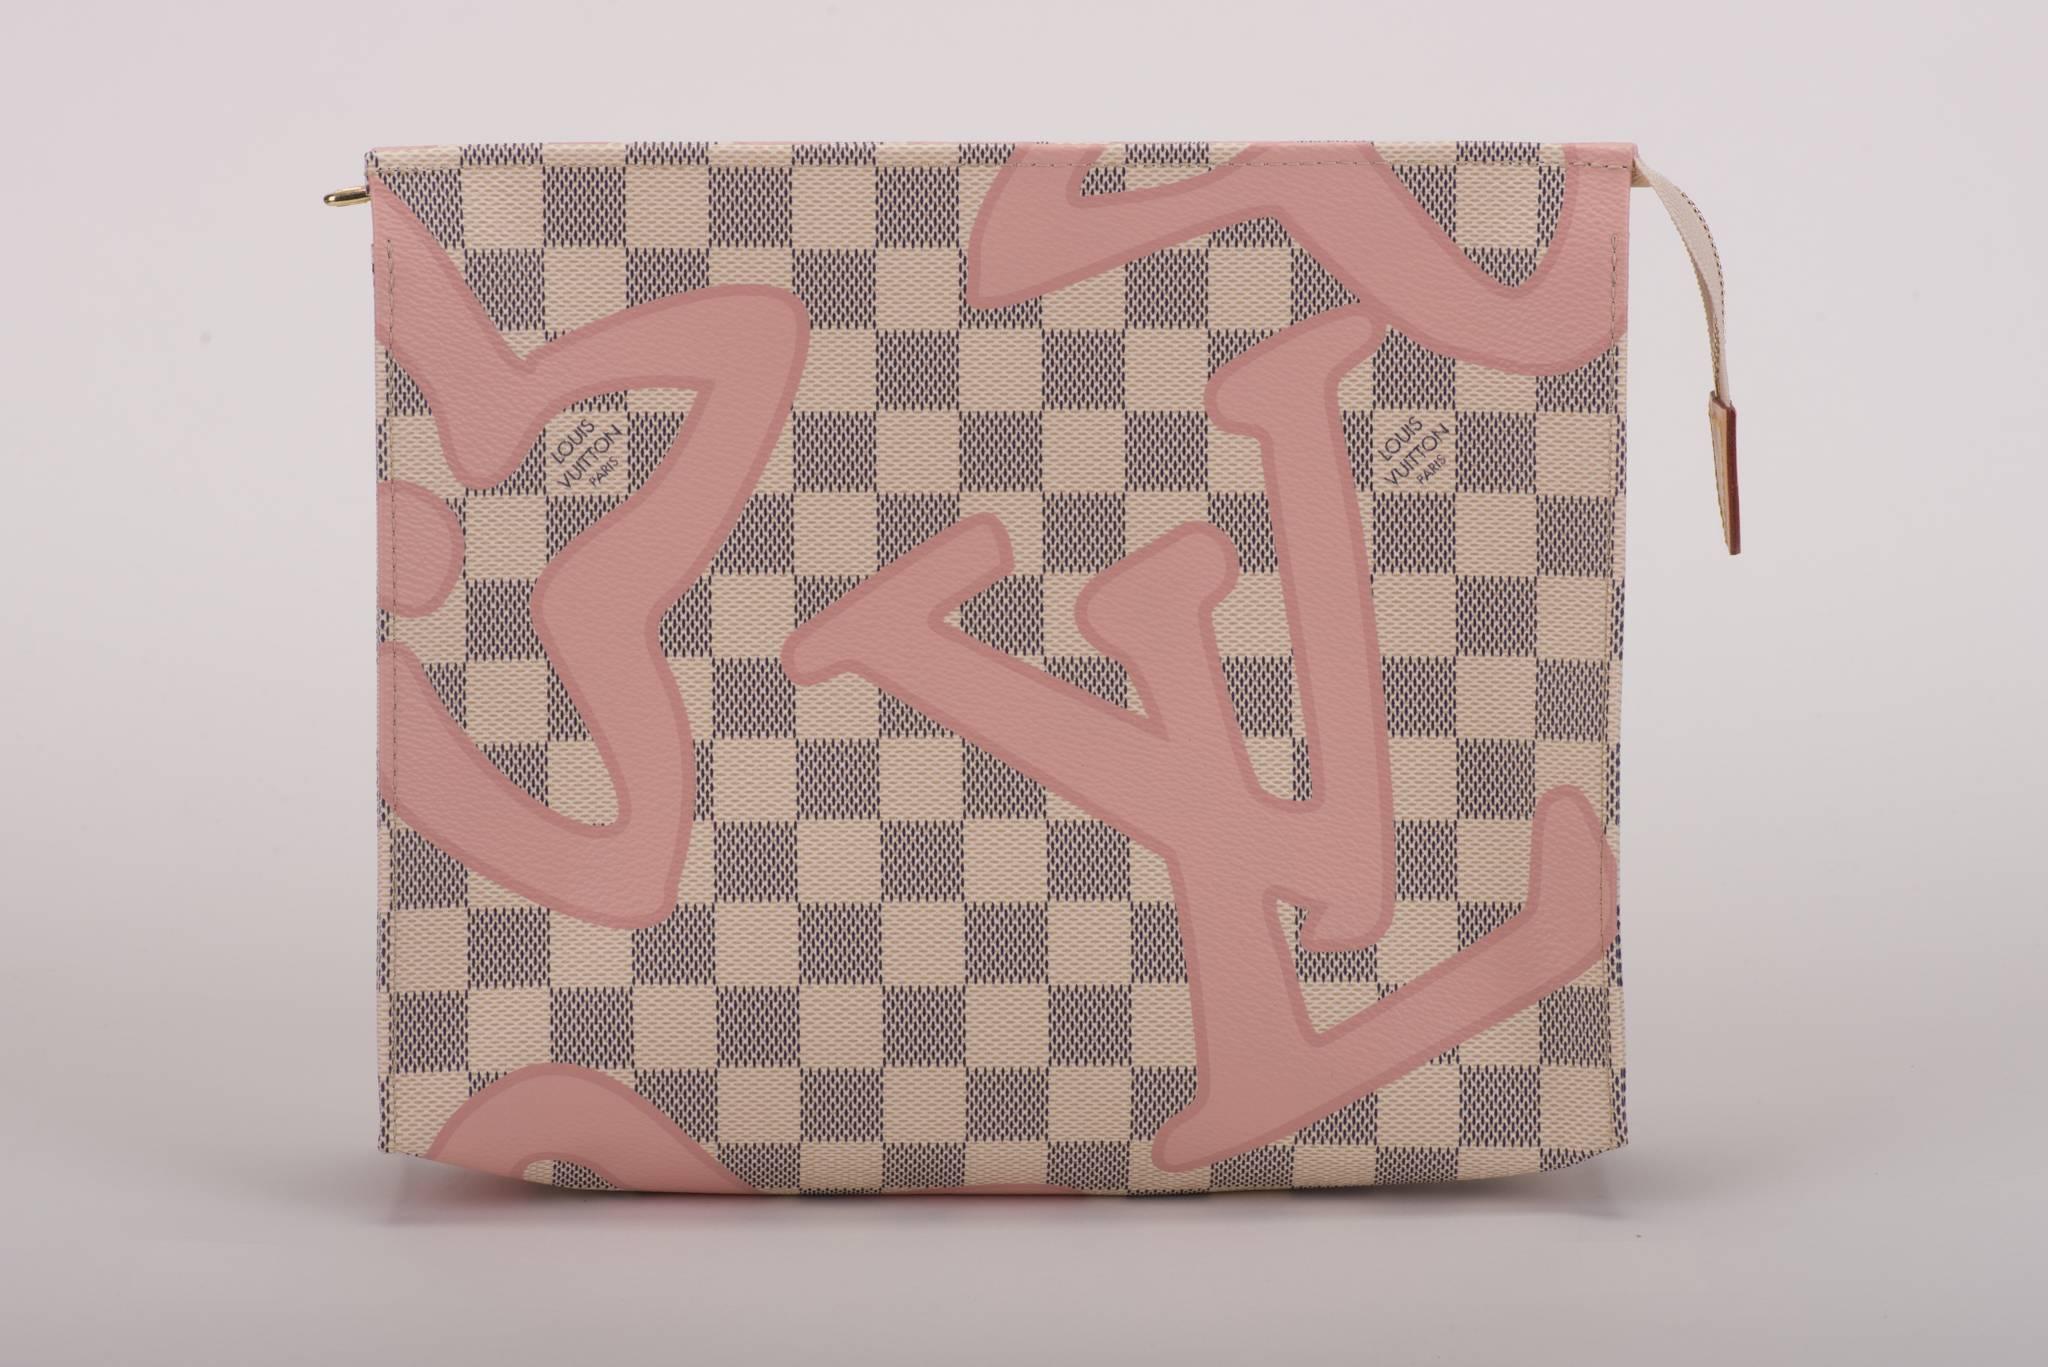 Louis Vuitton limited edition white admire couchette with pink decor. Brand new, comes with duster and box.